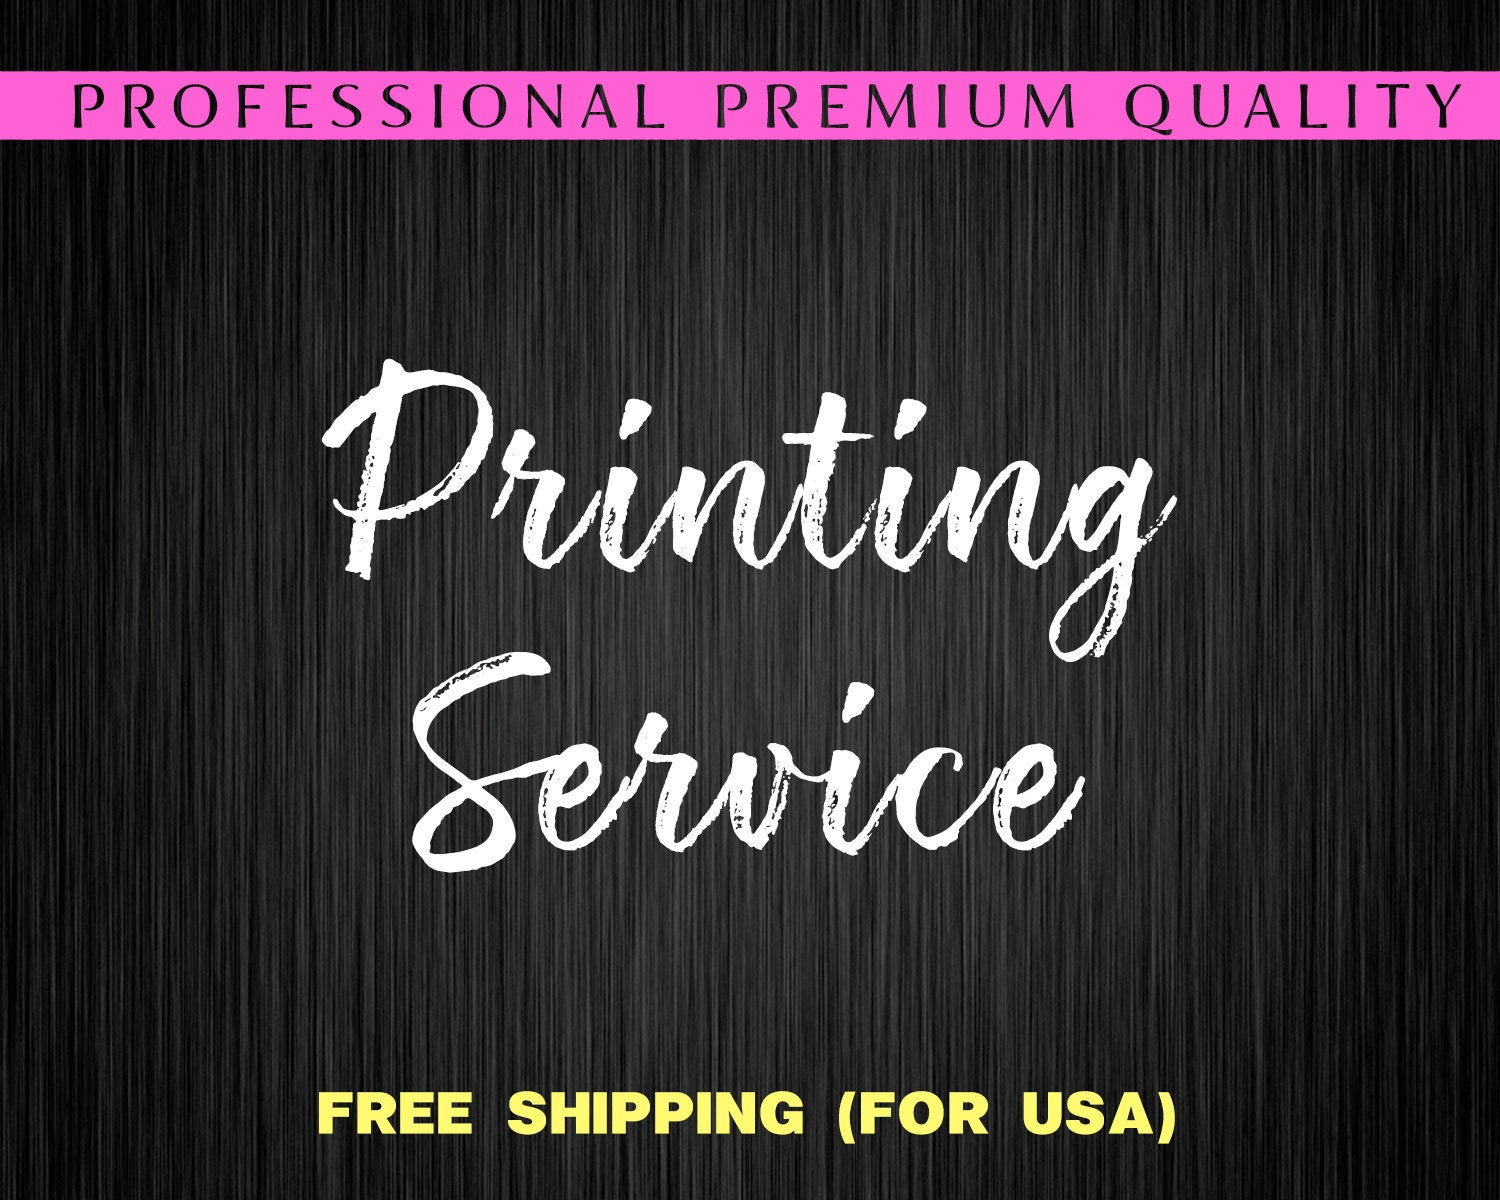 US 85GSM 75/25 Cotton Linen Paper,inkjet Printing Paper,ivory Color Resume  Paper,100 Sheets With Visible Fiber Letter Size 8.5x11 Inch -  Denmark